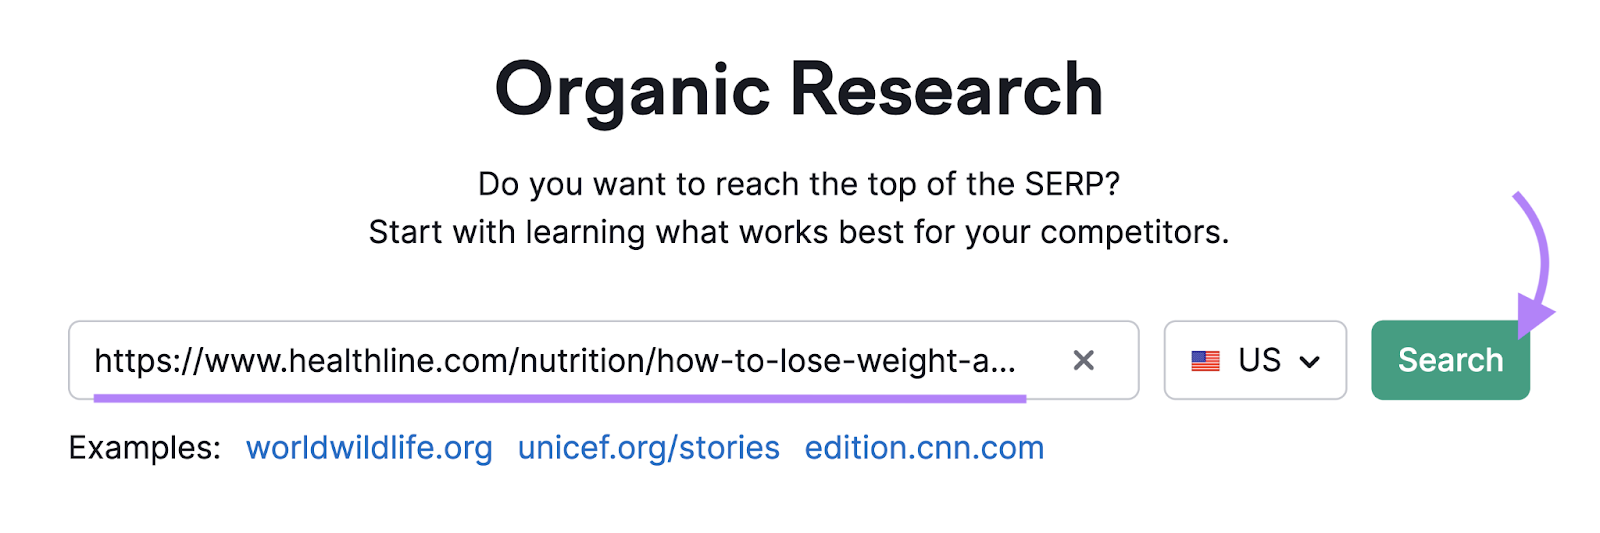 Healthline nonfiction  url entered into Organic Research tool